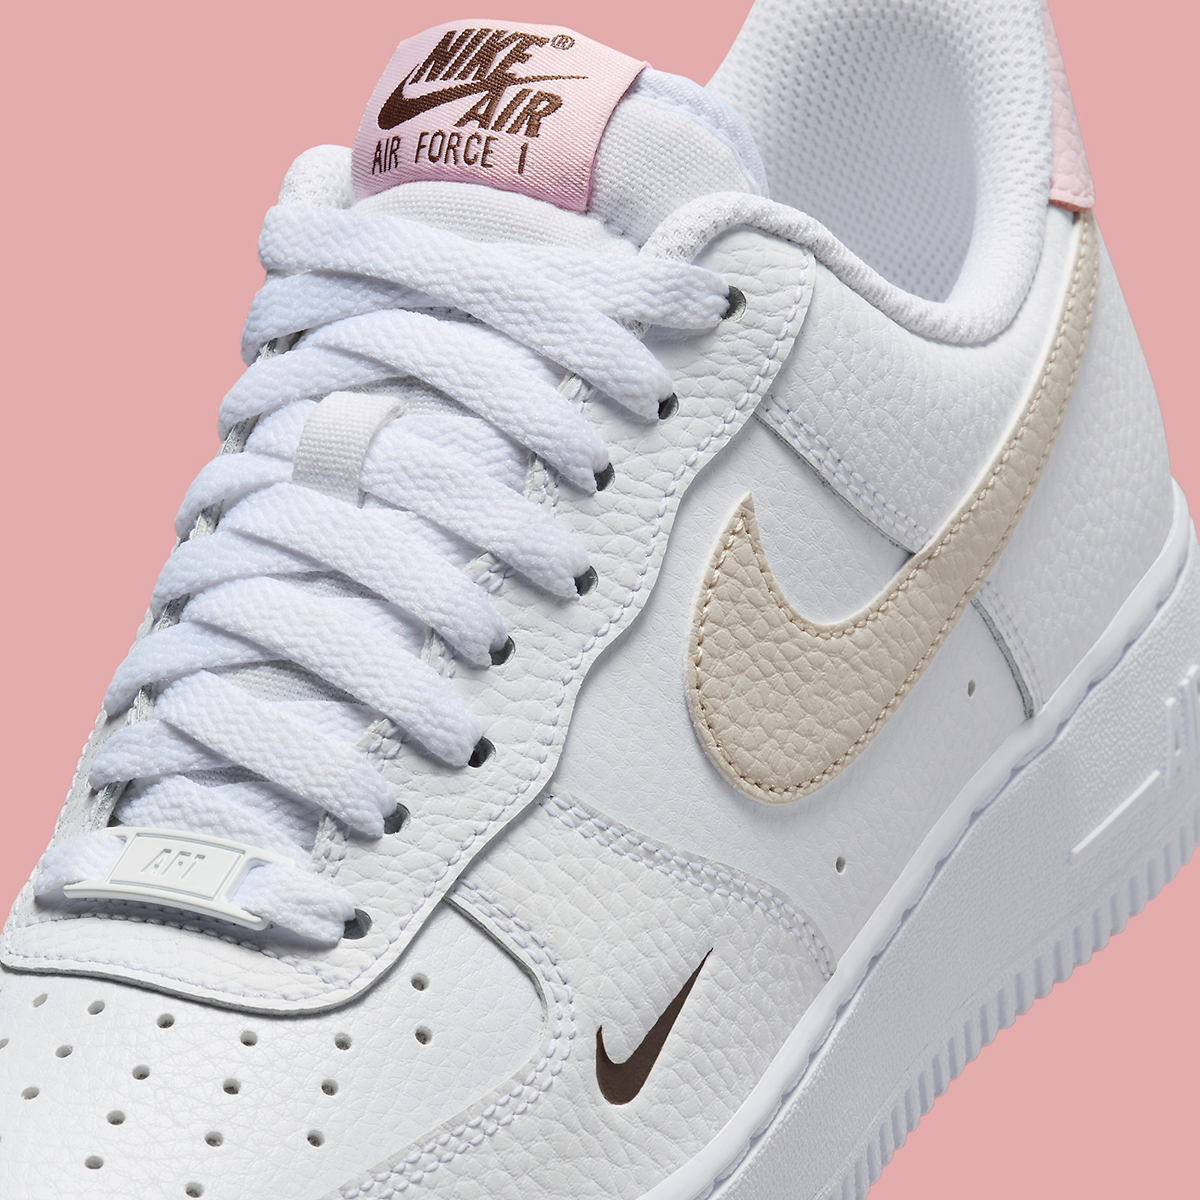 Nike Air Force 1 Low White Pink Coconut Milk Hf9992 100 2